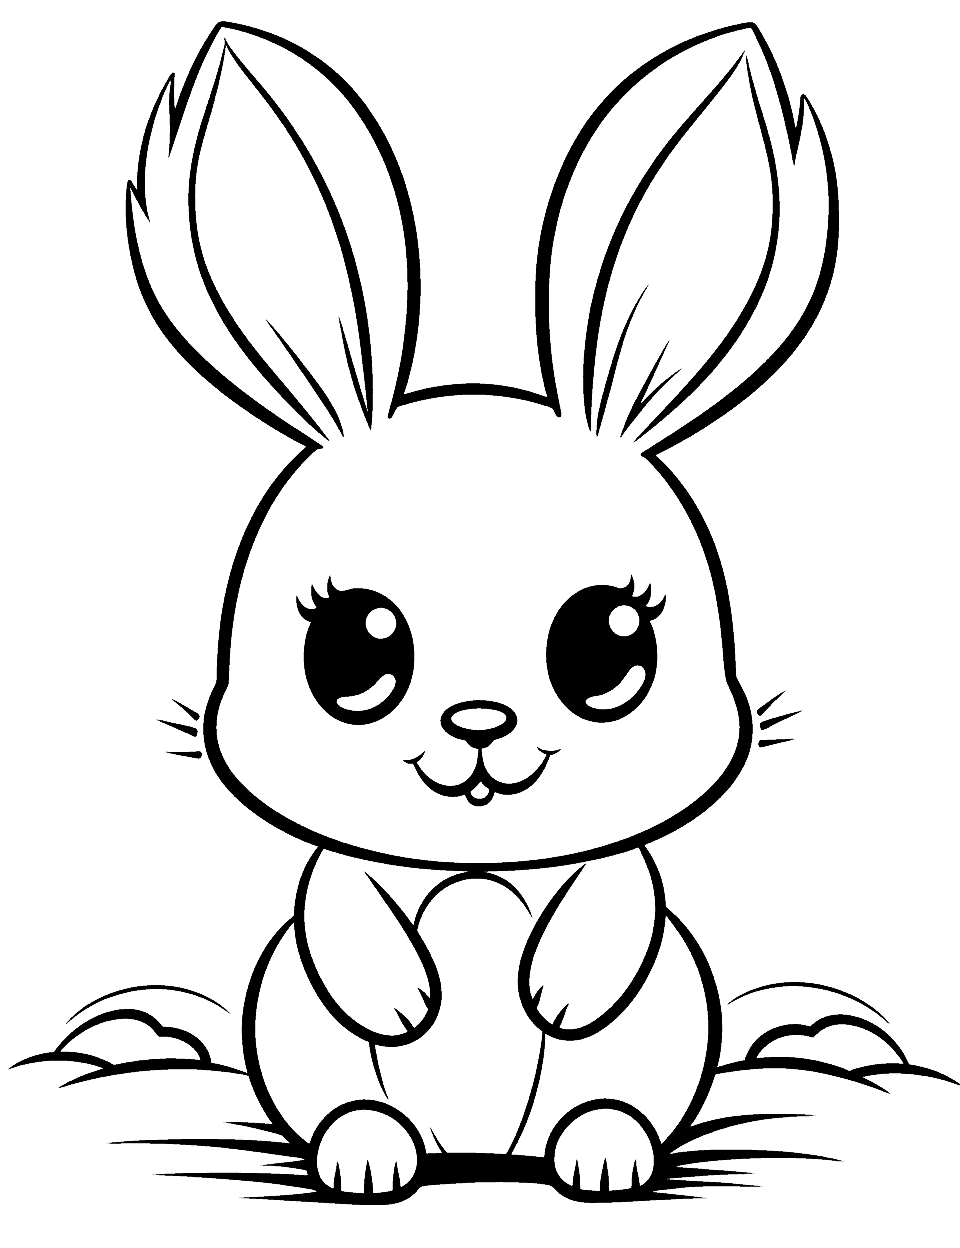 Kawaii Bunny with Big Eyes Coloring Page - An overly cute bunny with exaggerated large eyes and a sweet expression.